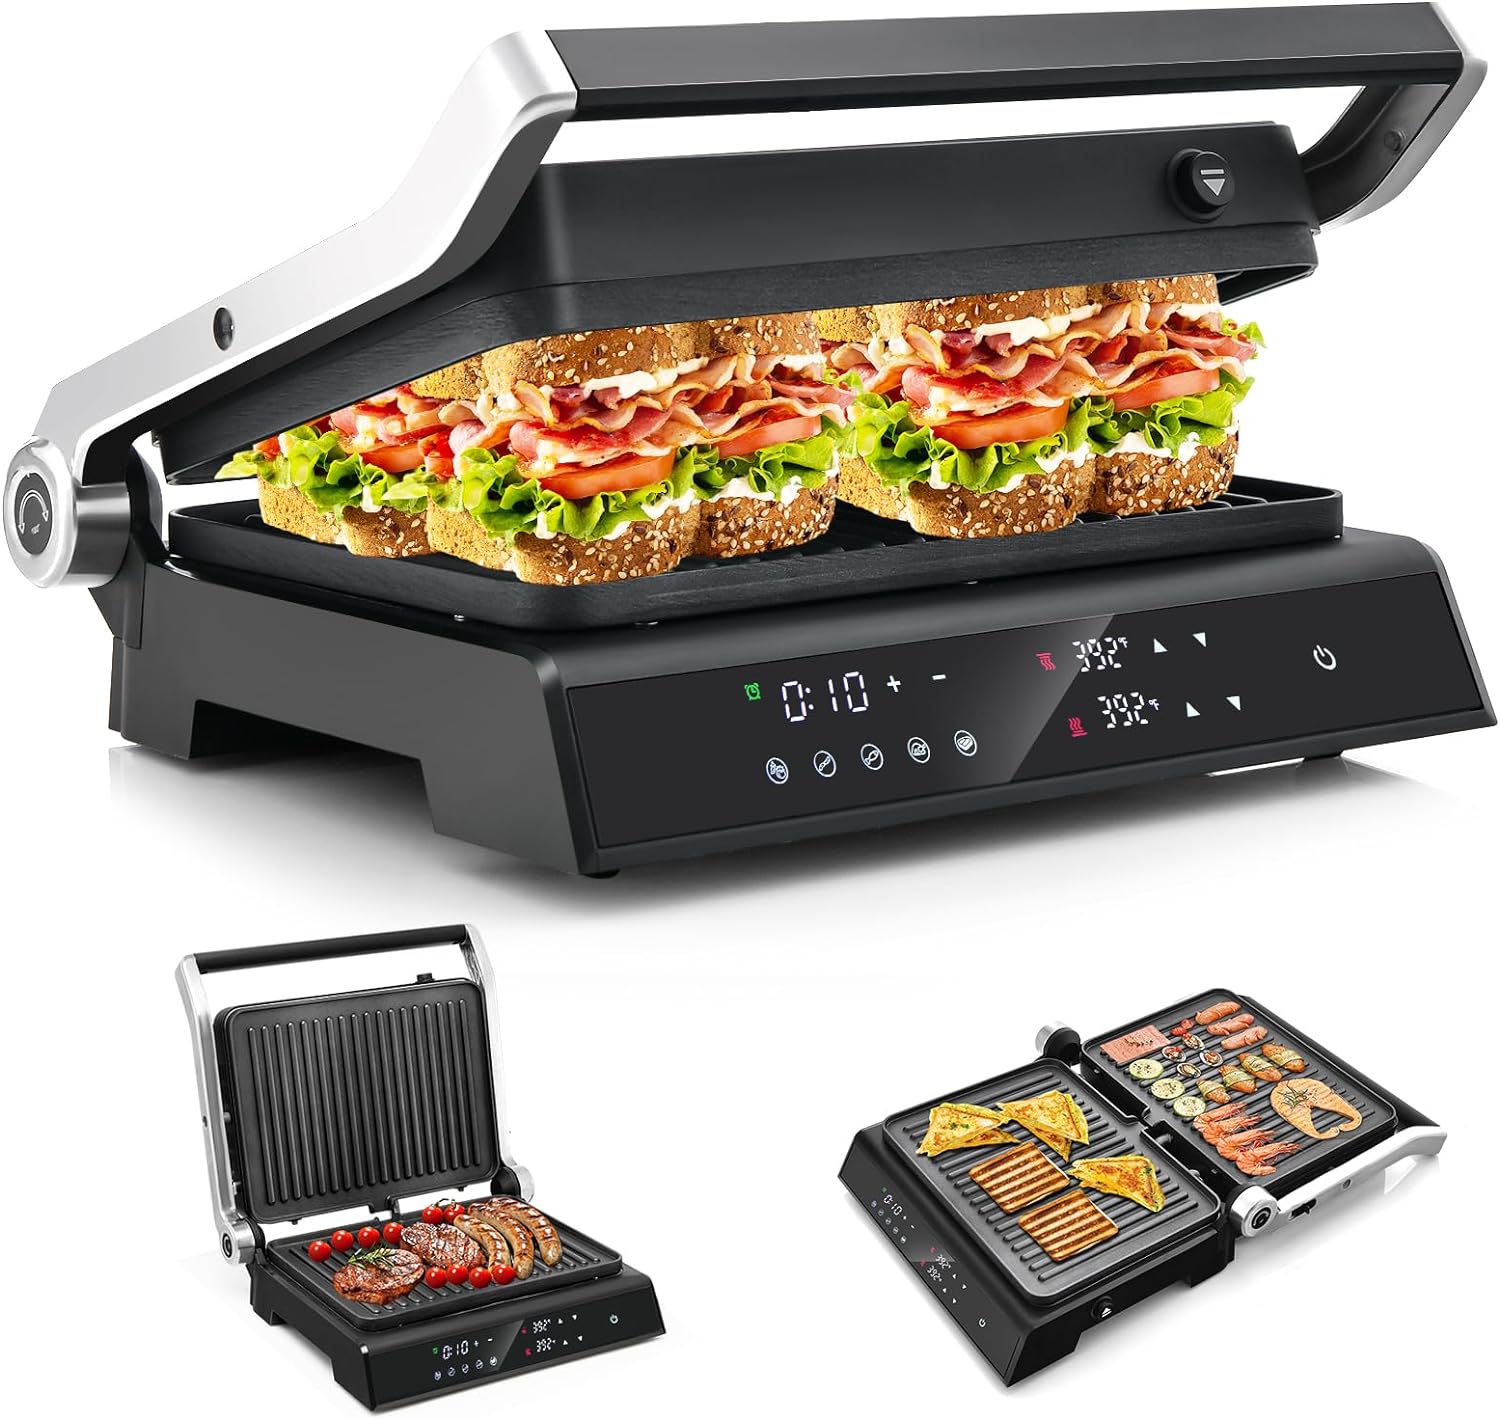 Relax4Life Contact Grill 1200 W, Electric Grill Sandwich Maker Paninimaker, 3-in-1 sandwich toaster 90 ° C-230 ° C, Grill Toaster With 4-Hour Timer, Indoor Grill with Non-Stick Coating and Removable